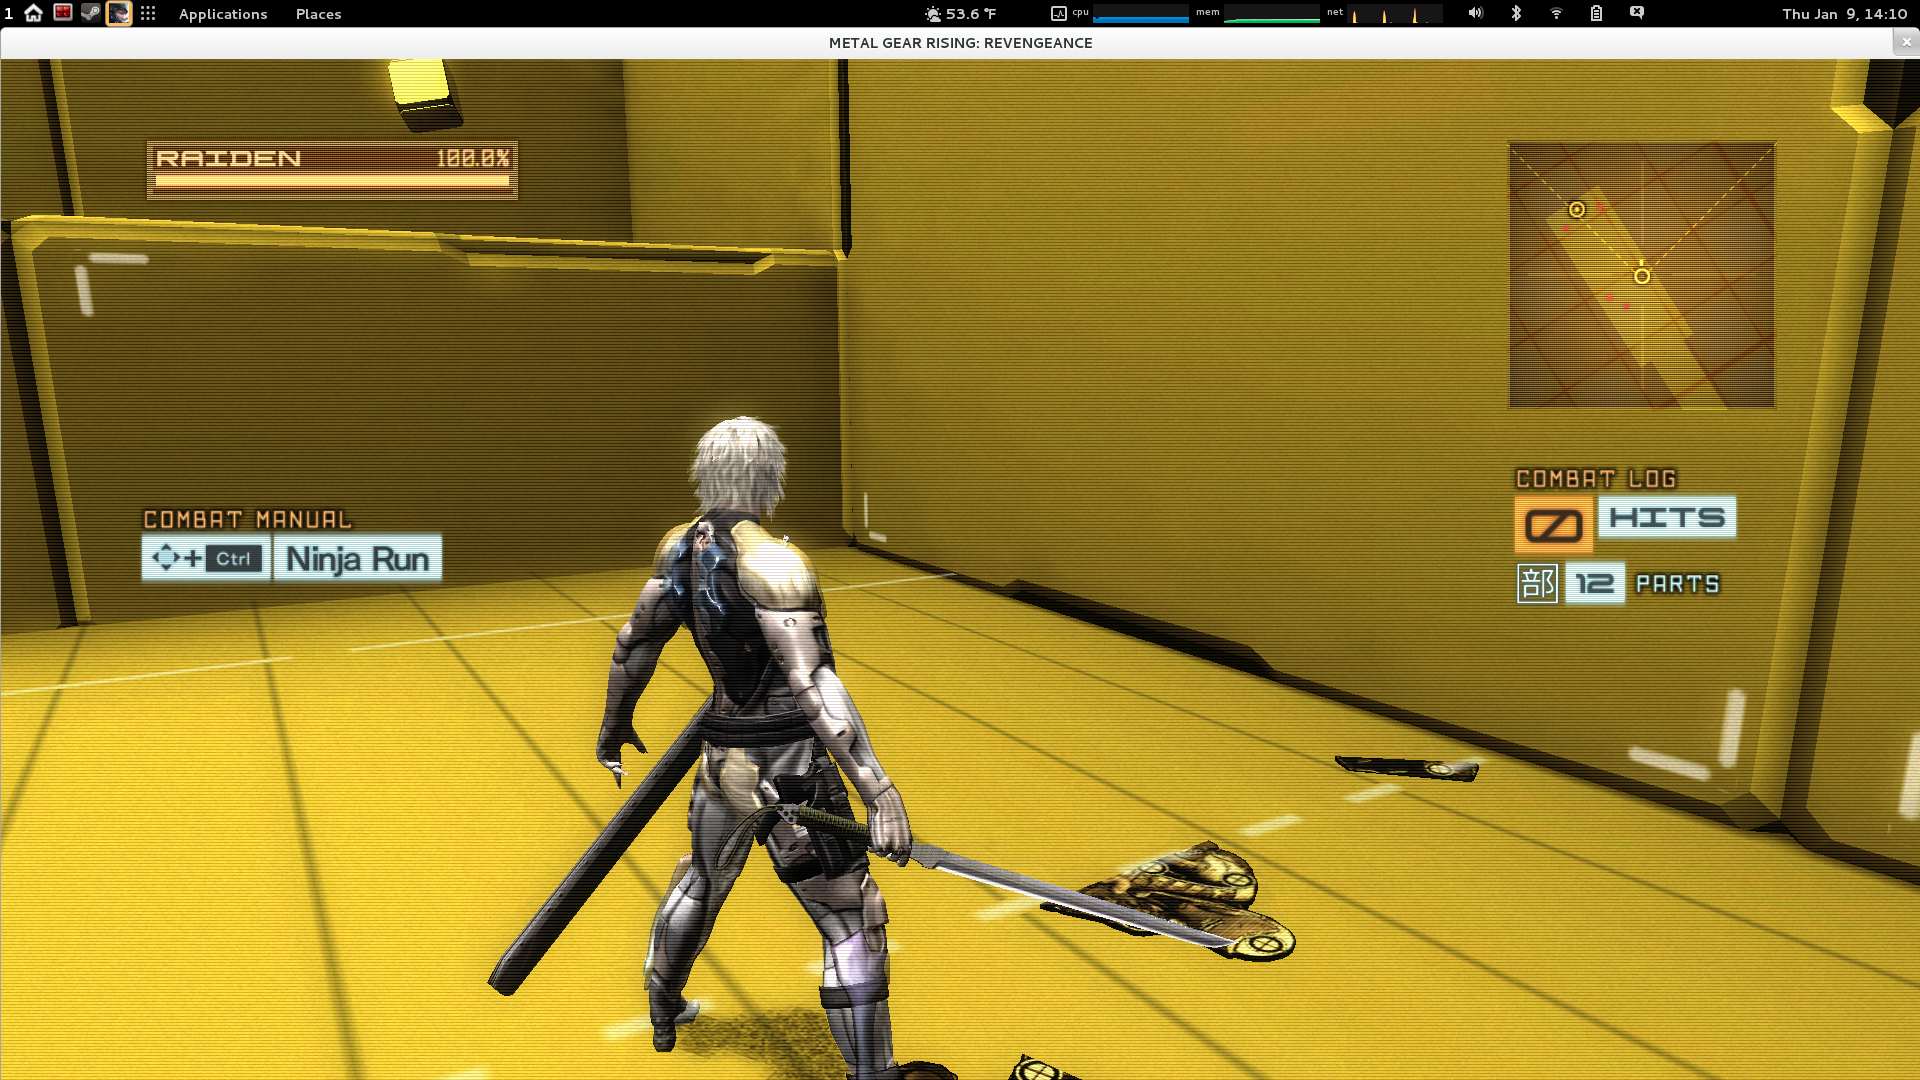 4B4E080A - Metal Gear Rising: Revengeance · Issue #1177 ·  xenia-project/game-compatibility · GitHub